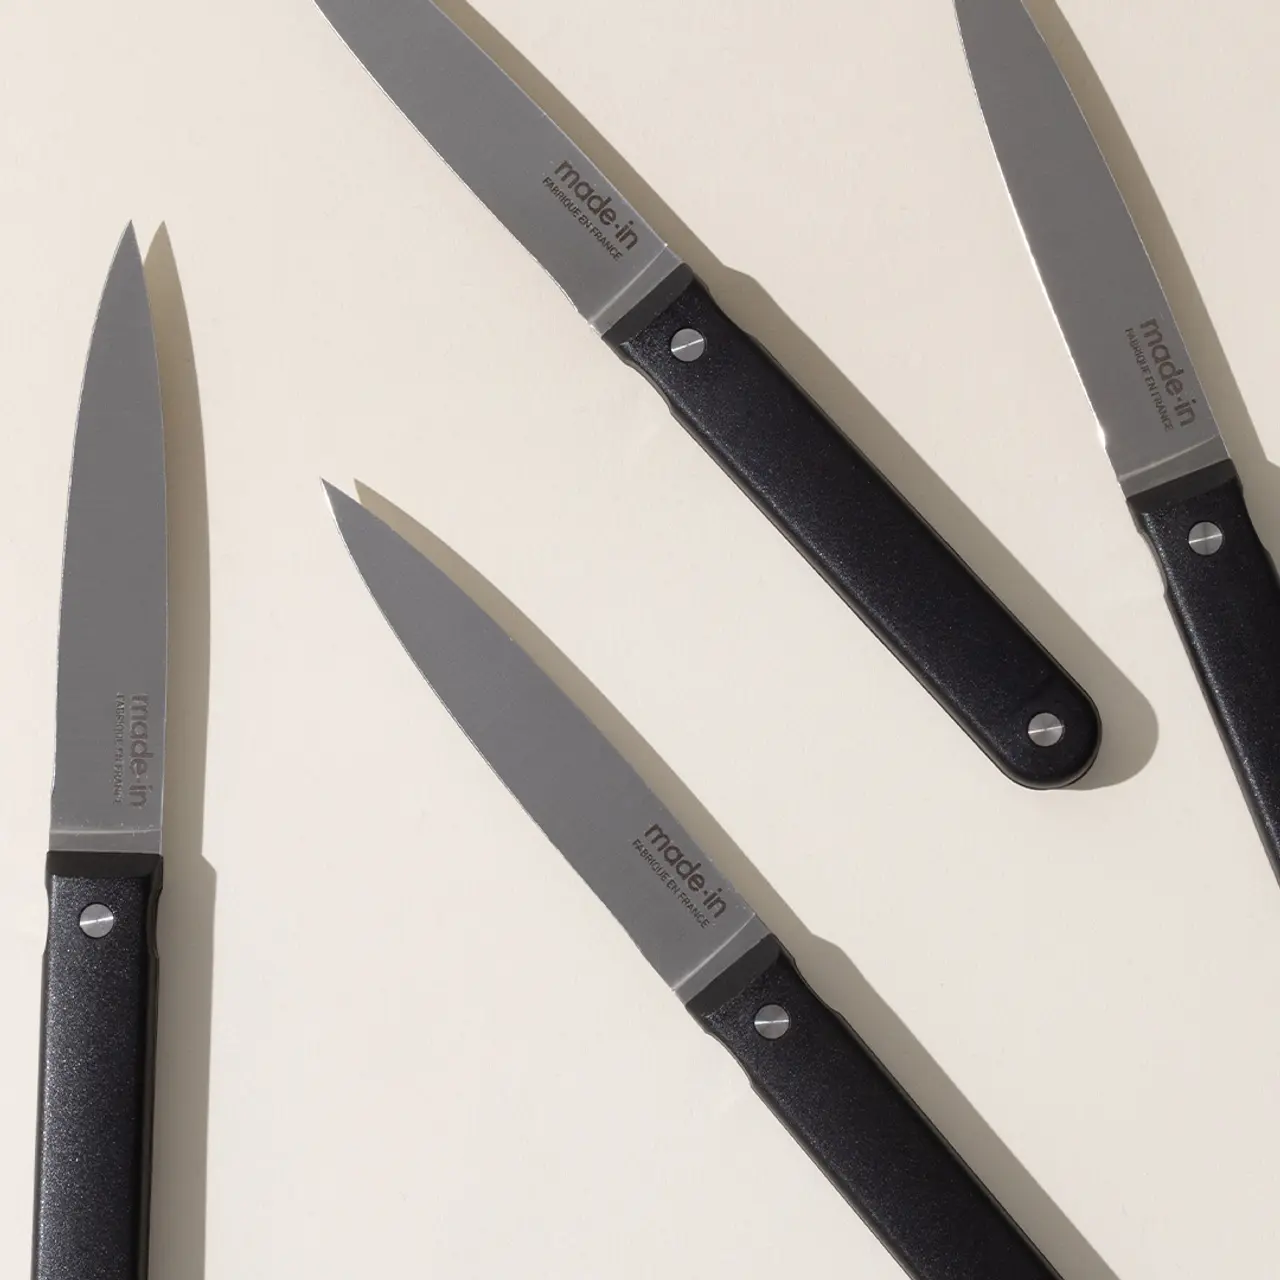 Three black-handled kitchen knives with stainless steel blades are laid out diagonally on a light background.